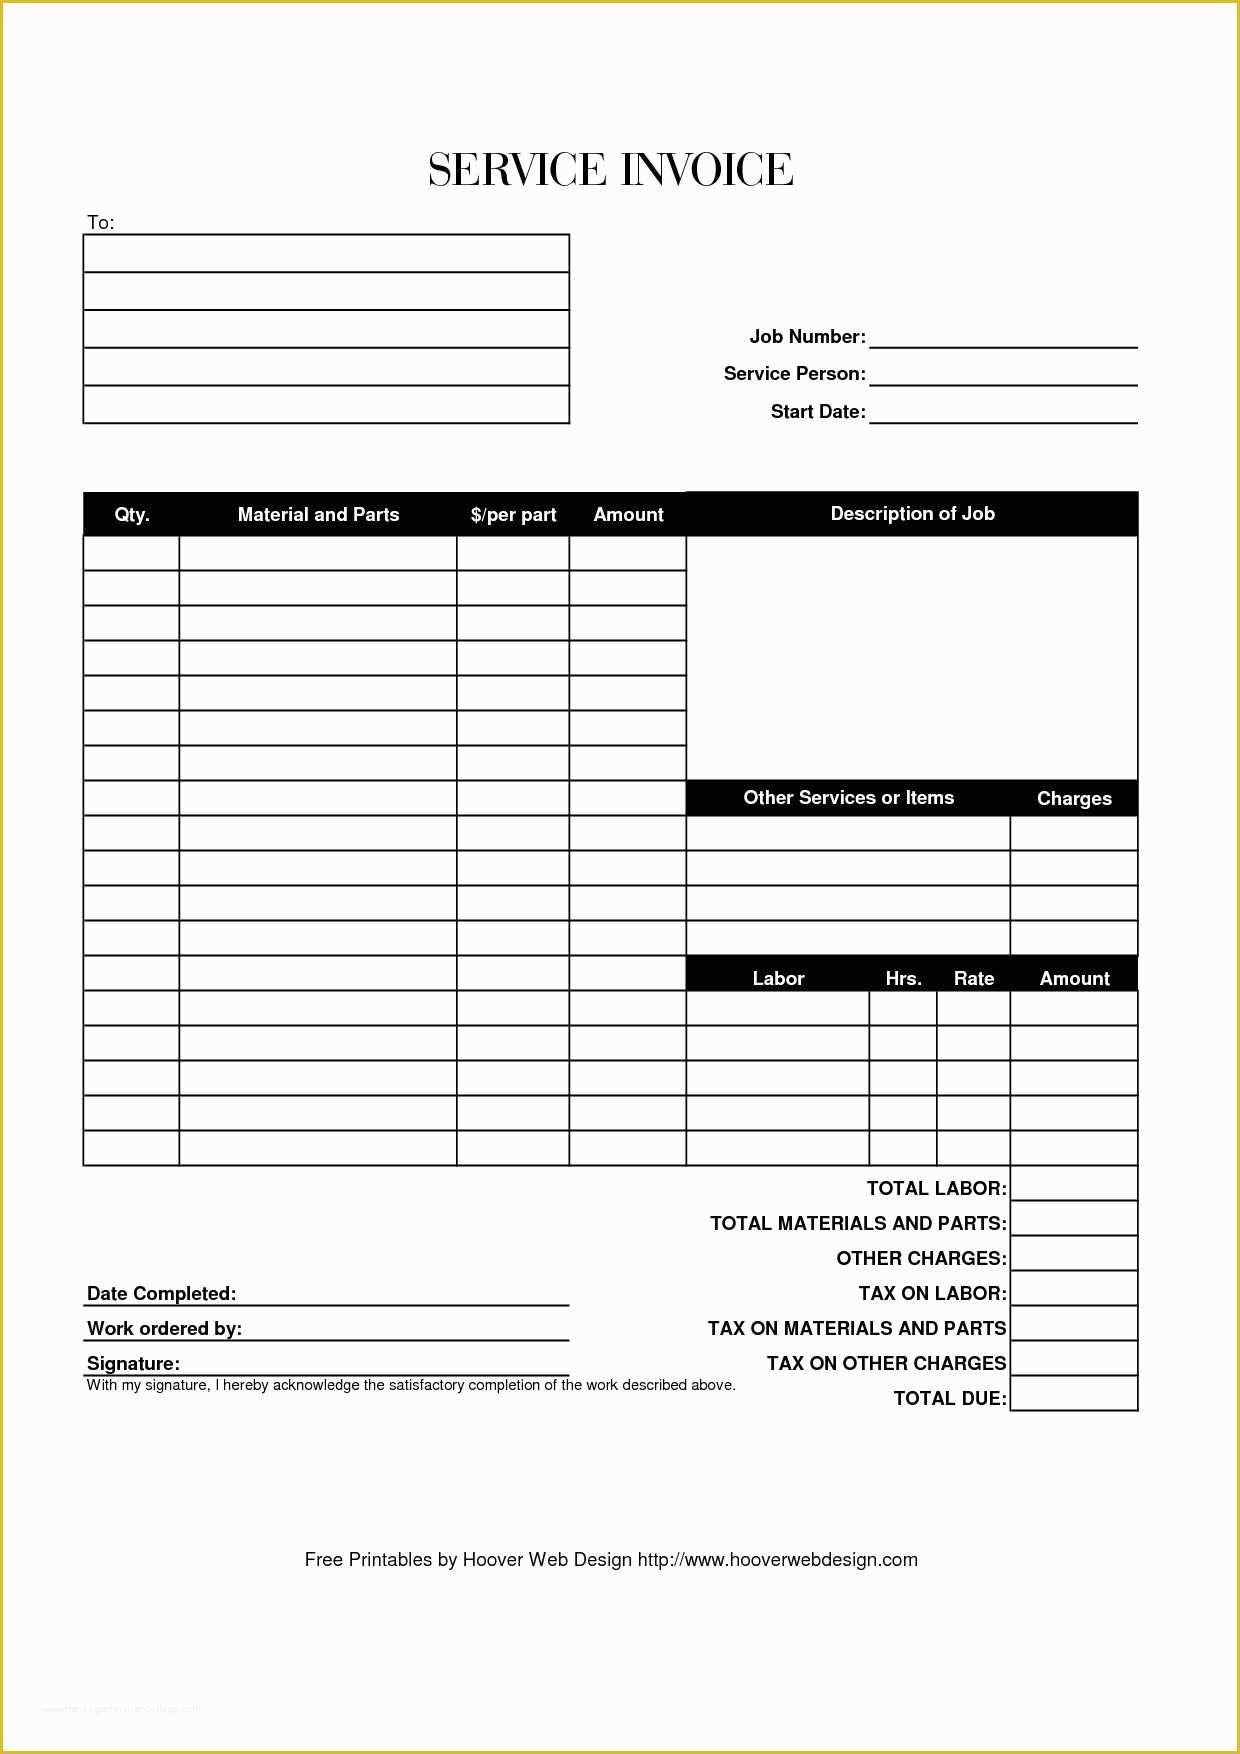 Free Invoice Template Word Of Free Printable Invoice Template 10 Printable Invoice